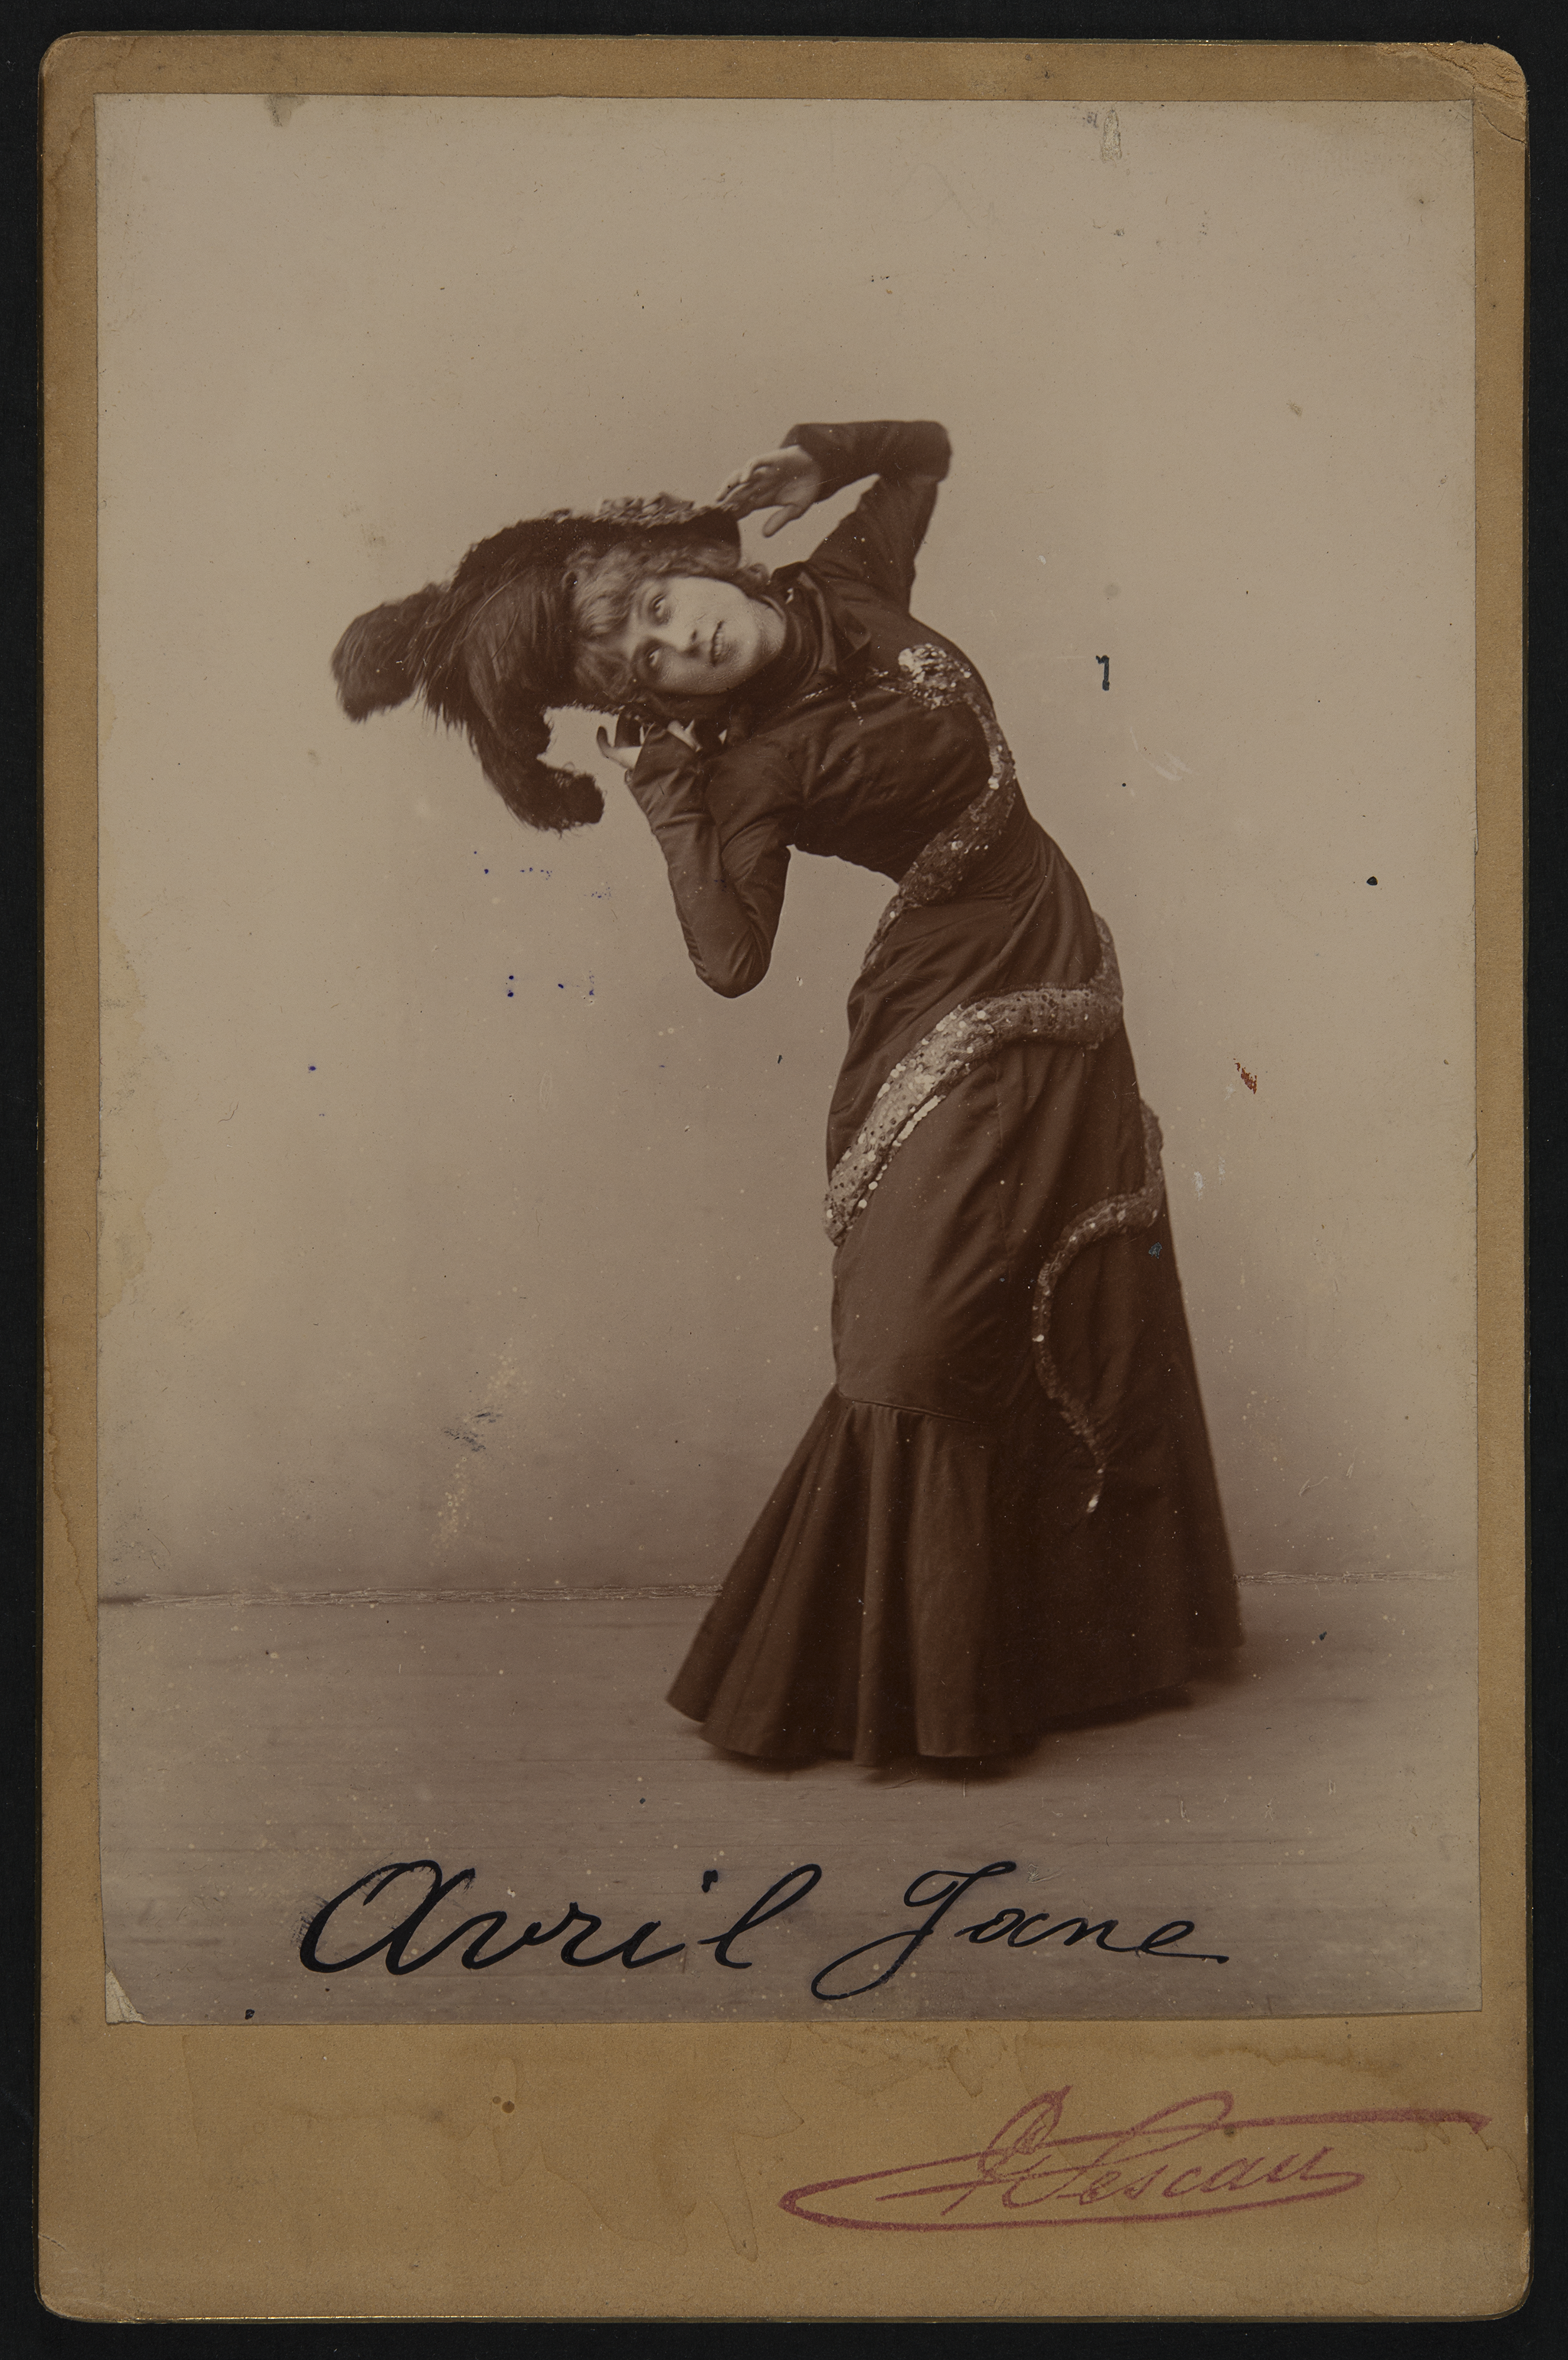 Sepia photograph of a woman bending her back and having her hands near her ears. She wears a dark colored dress and headdress. The bottom of the ground has a signature with &ldquo;Avril Jane.&rdquo;